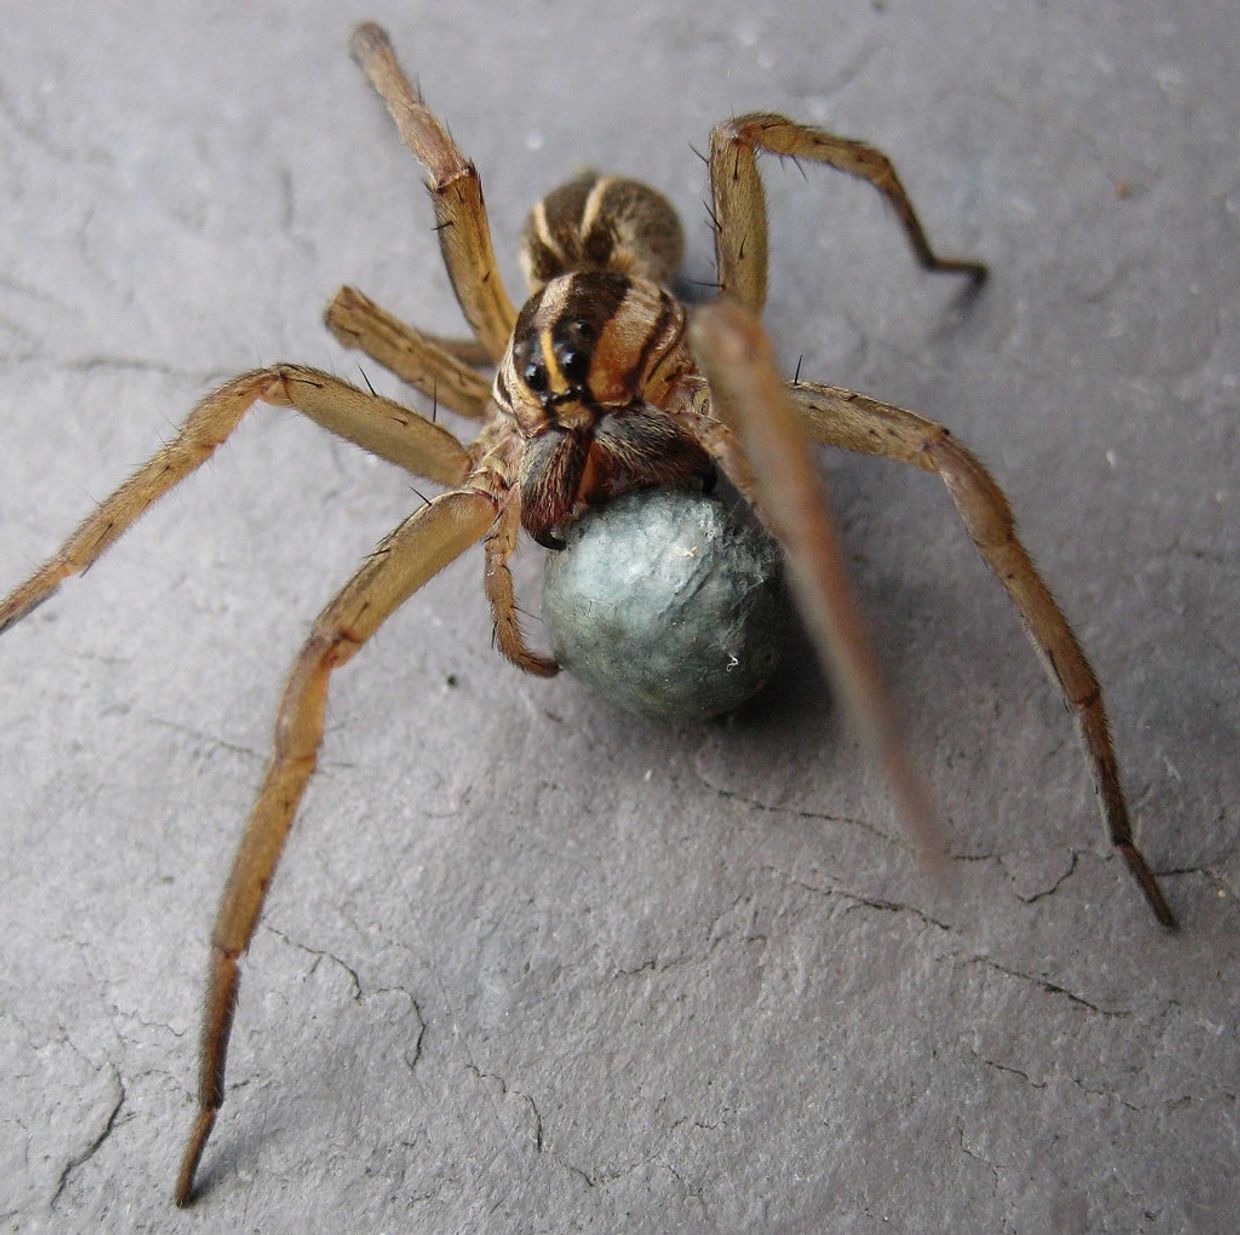 Virginia spider with large egg sack